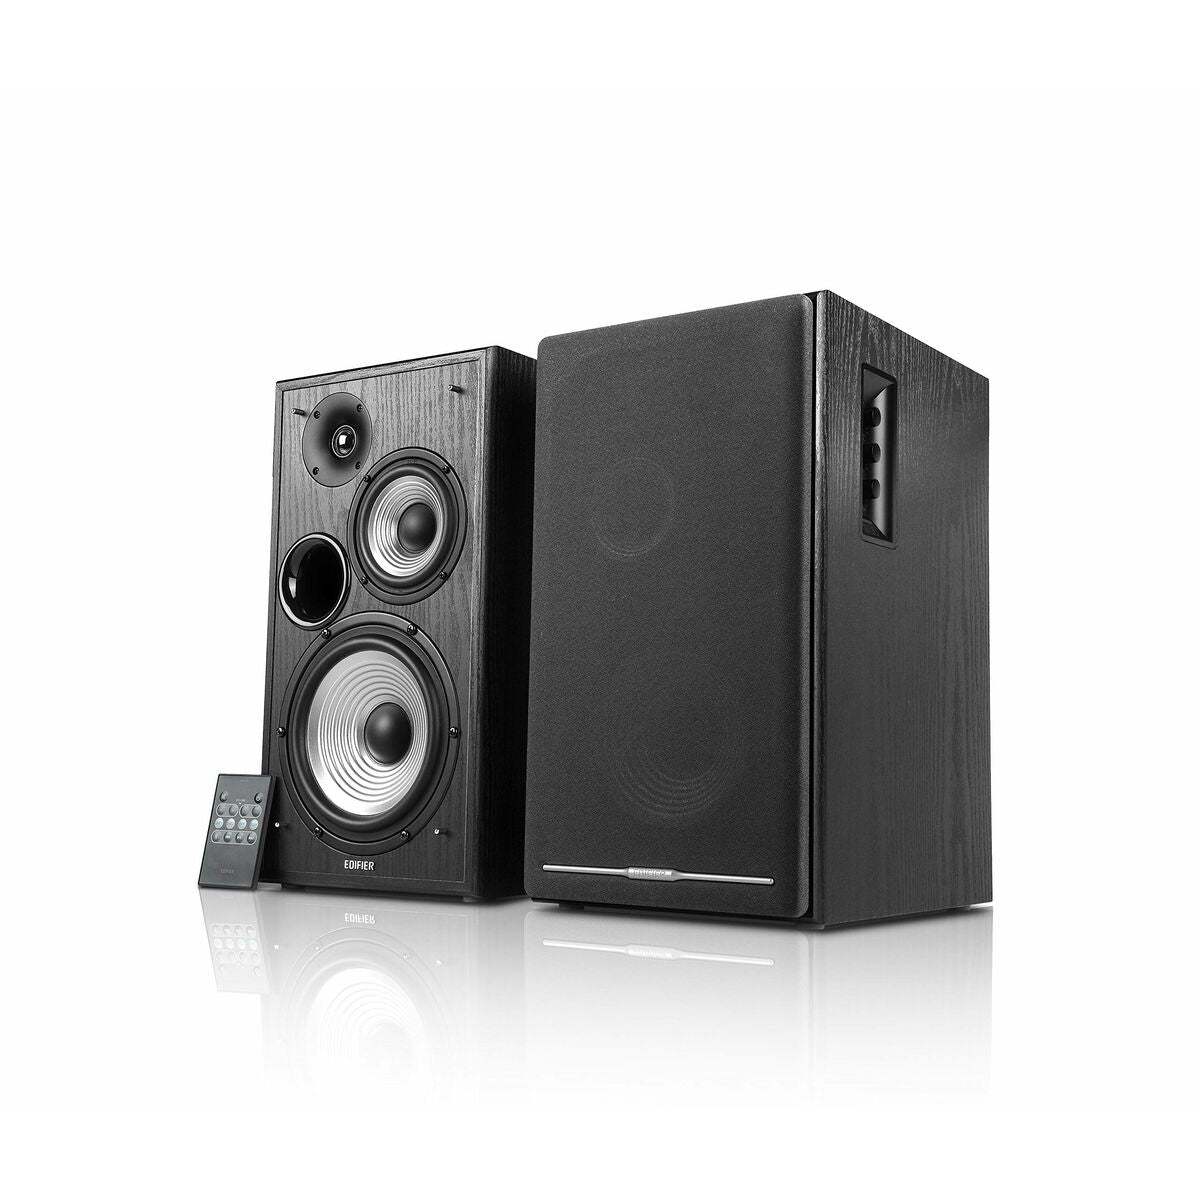 Speakers Edifier R2750DB, Edifier, Electronics, Audio and Hi-Fi equipment, speakers-edifier-r2750db, Brand_Edifier, category-reference-2609, category-reference-2637, category-reference-2882, category-reference-t-19653, category-reference-t-7441, category-reference-t-7442, cinema and television, computers / components, Condition_NEW, entertainment, music, Price_300 - 400, RiotNook